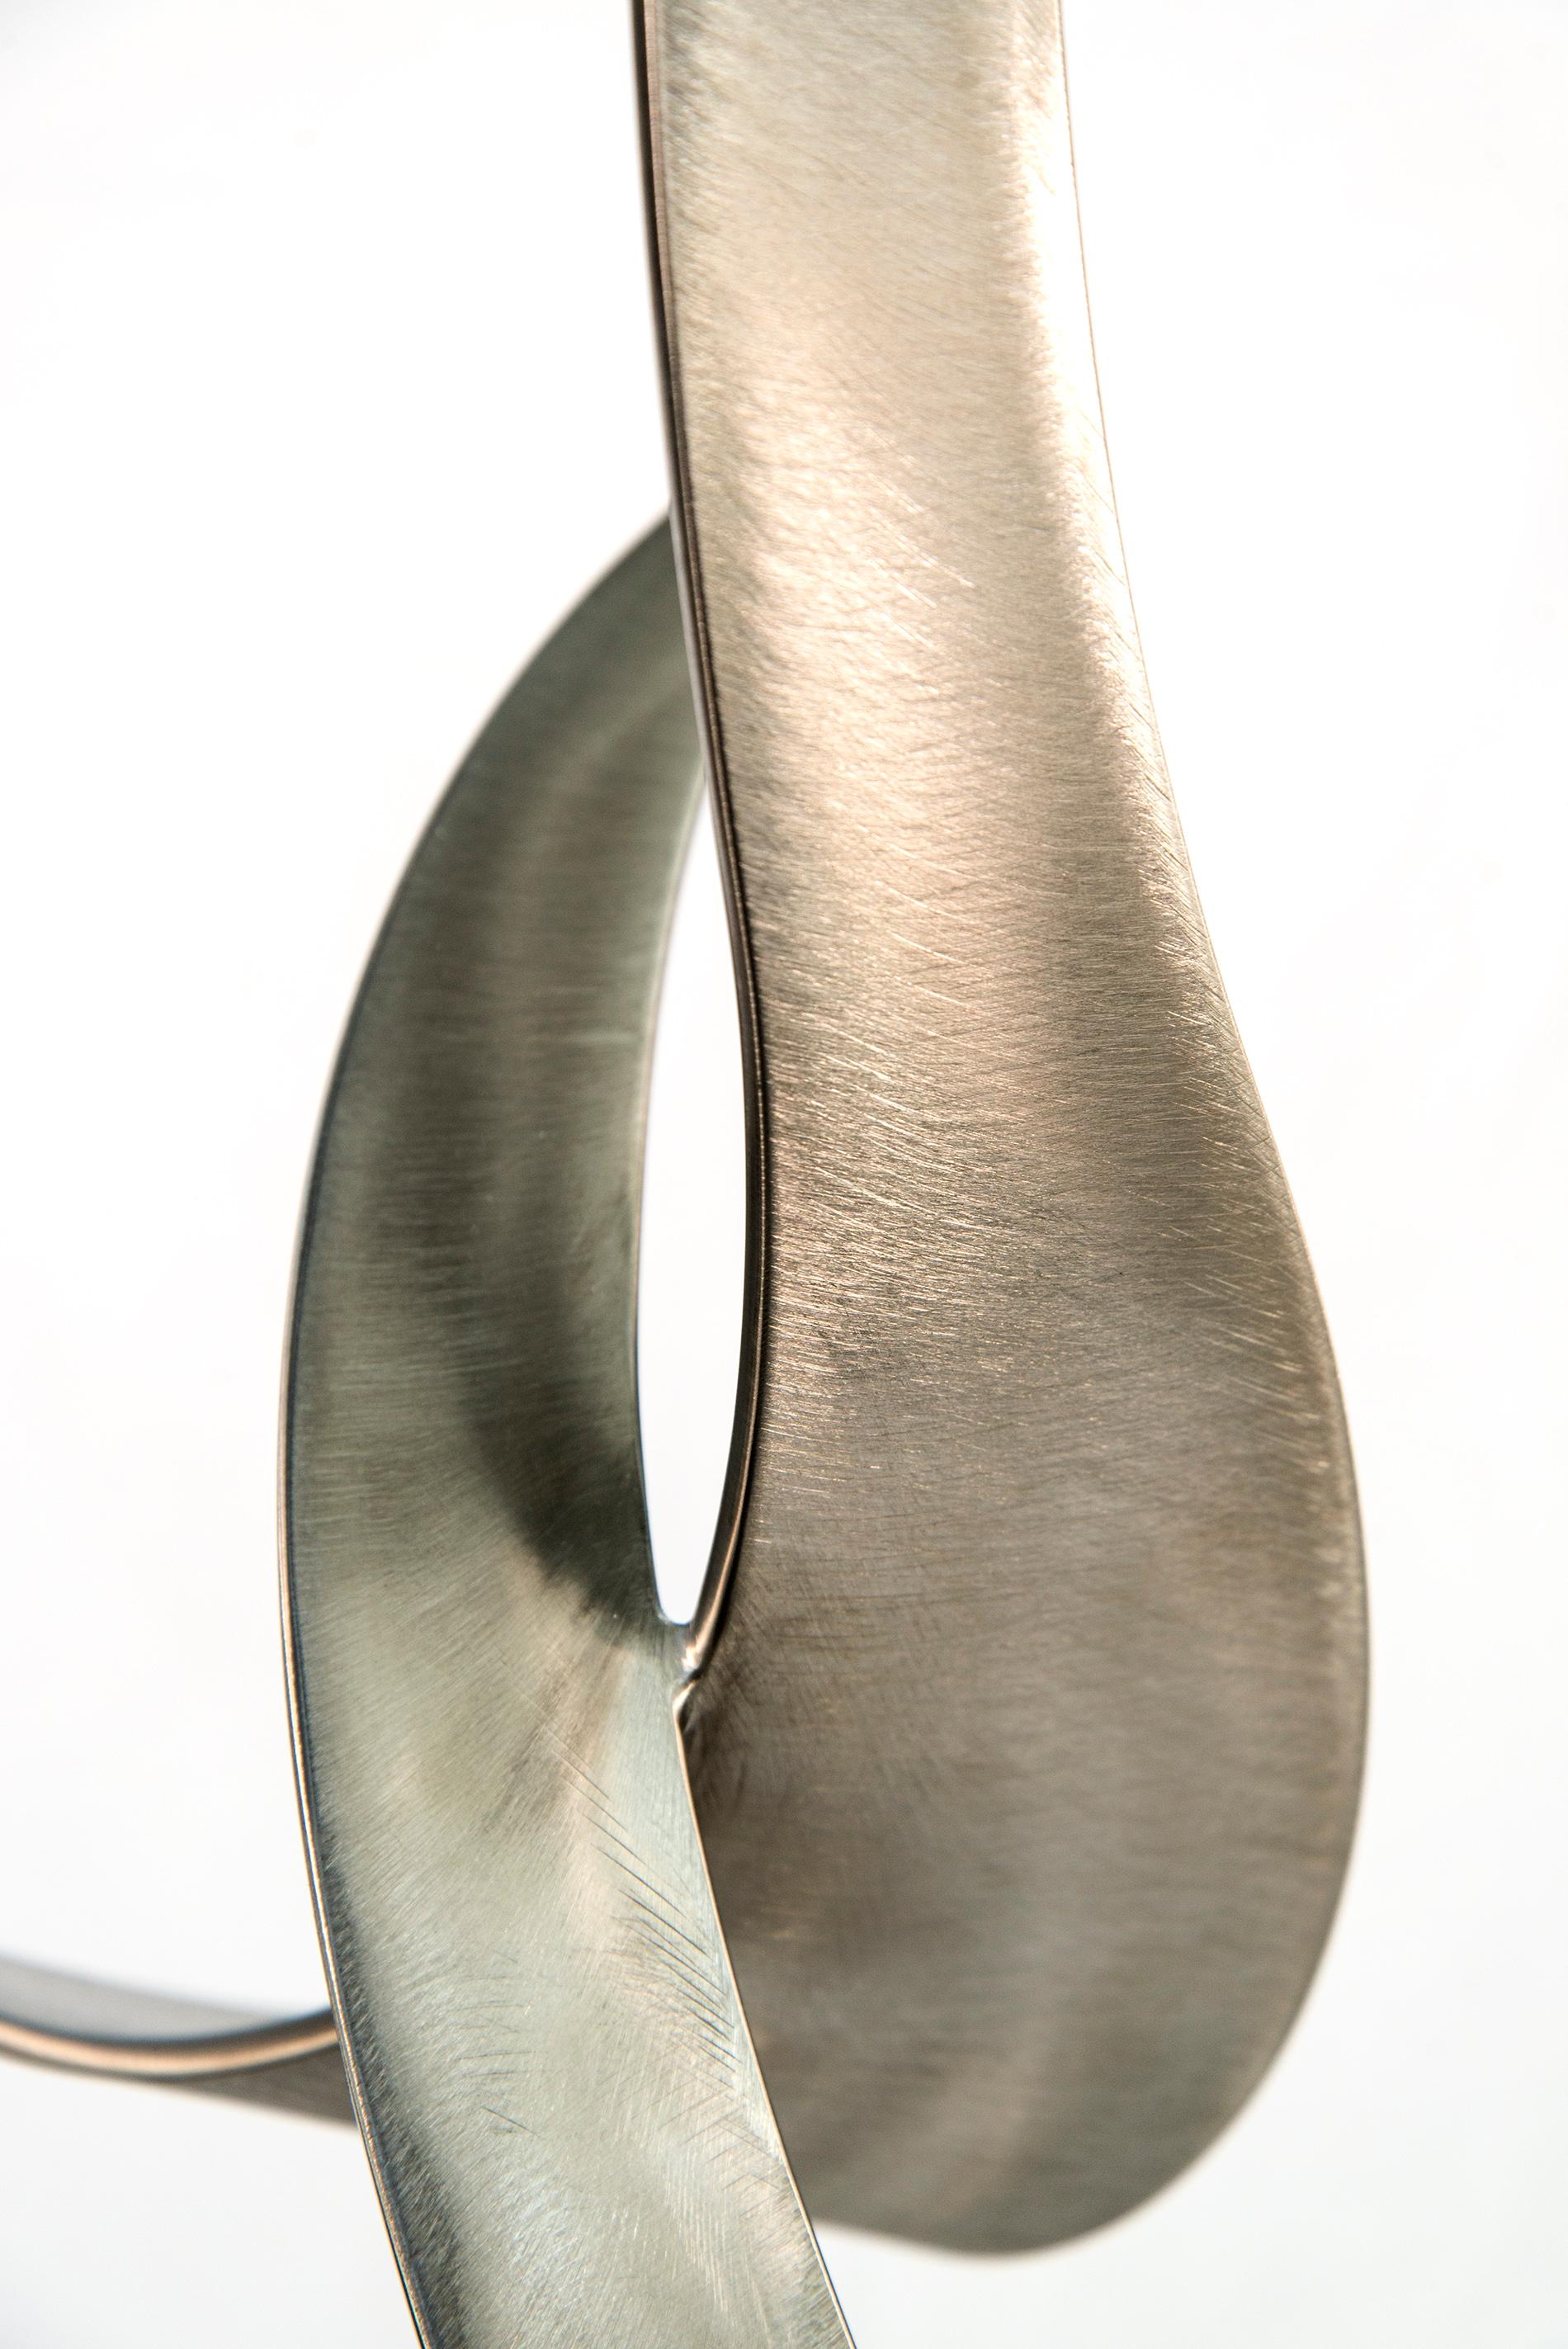 Elegant Movements 195 - contemporary, abstract, forged stainless steel sculpture For Sale 2